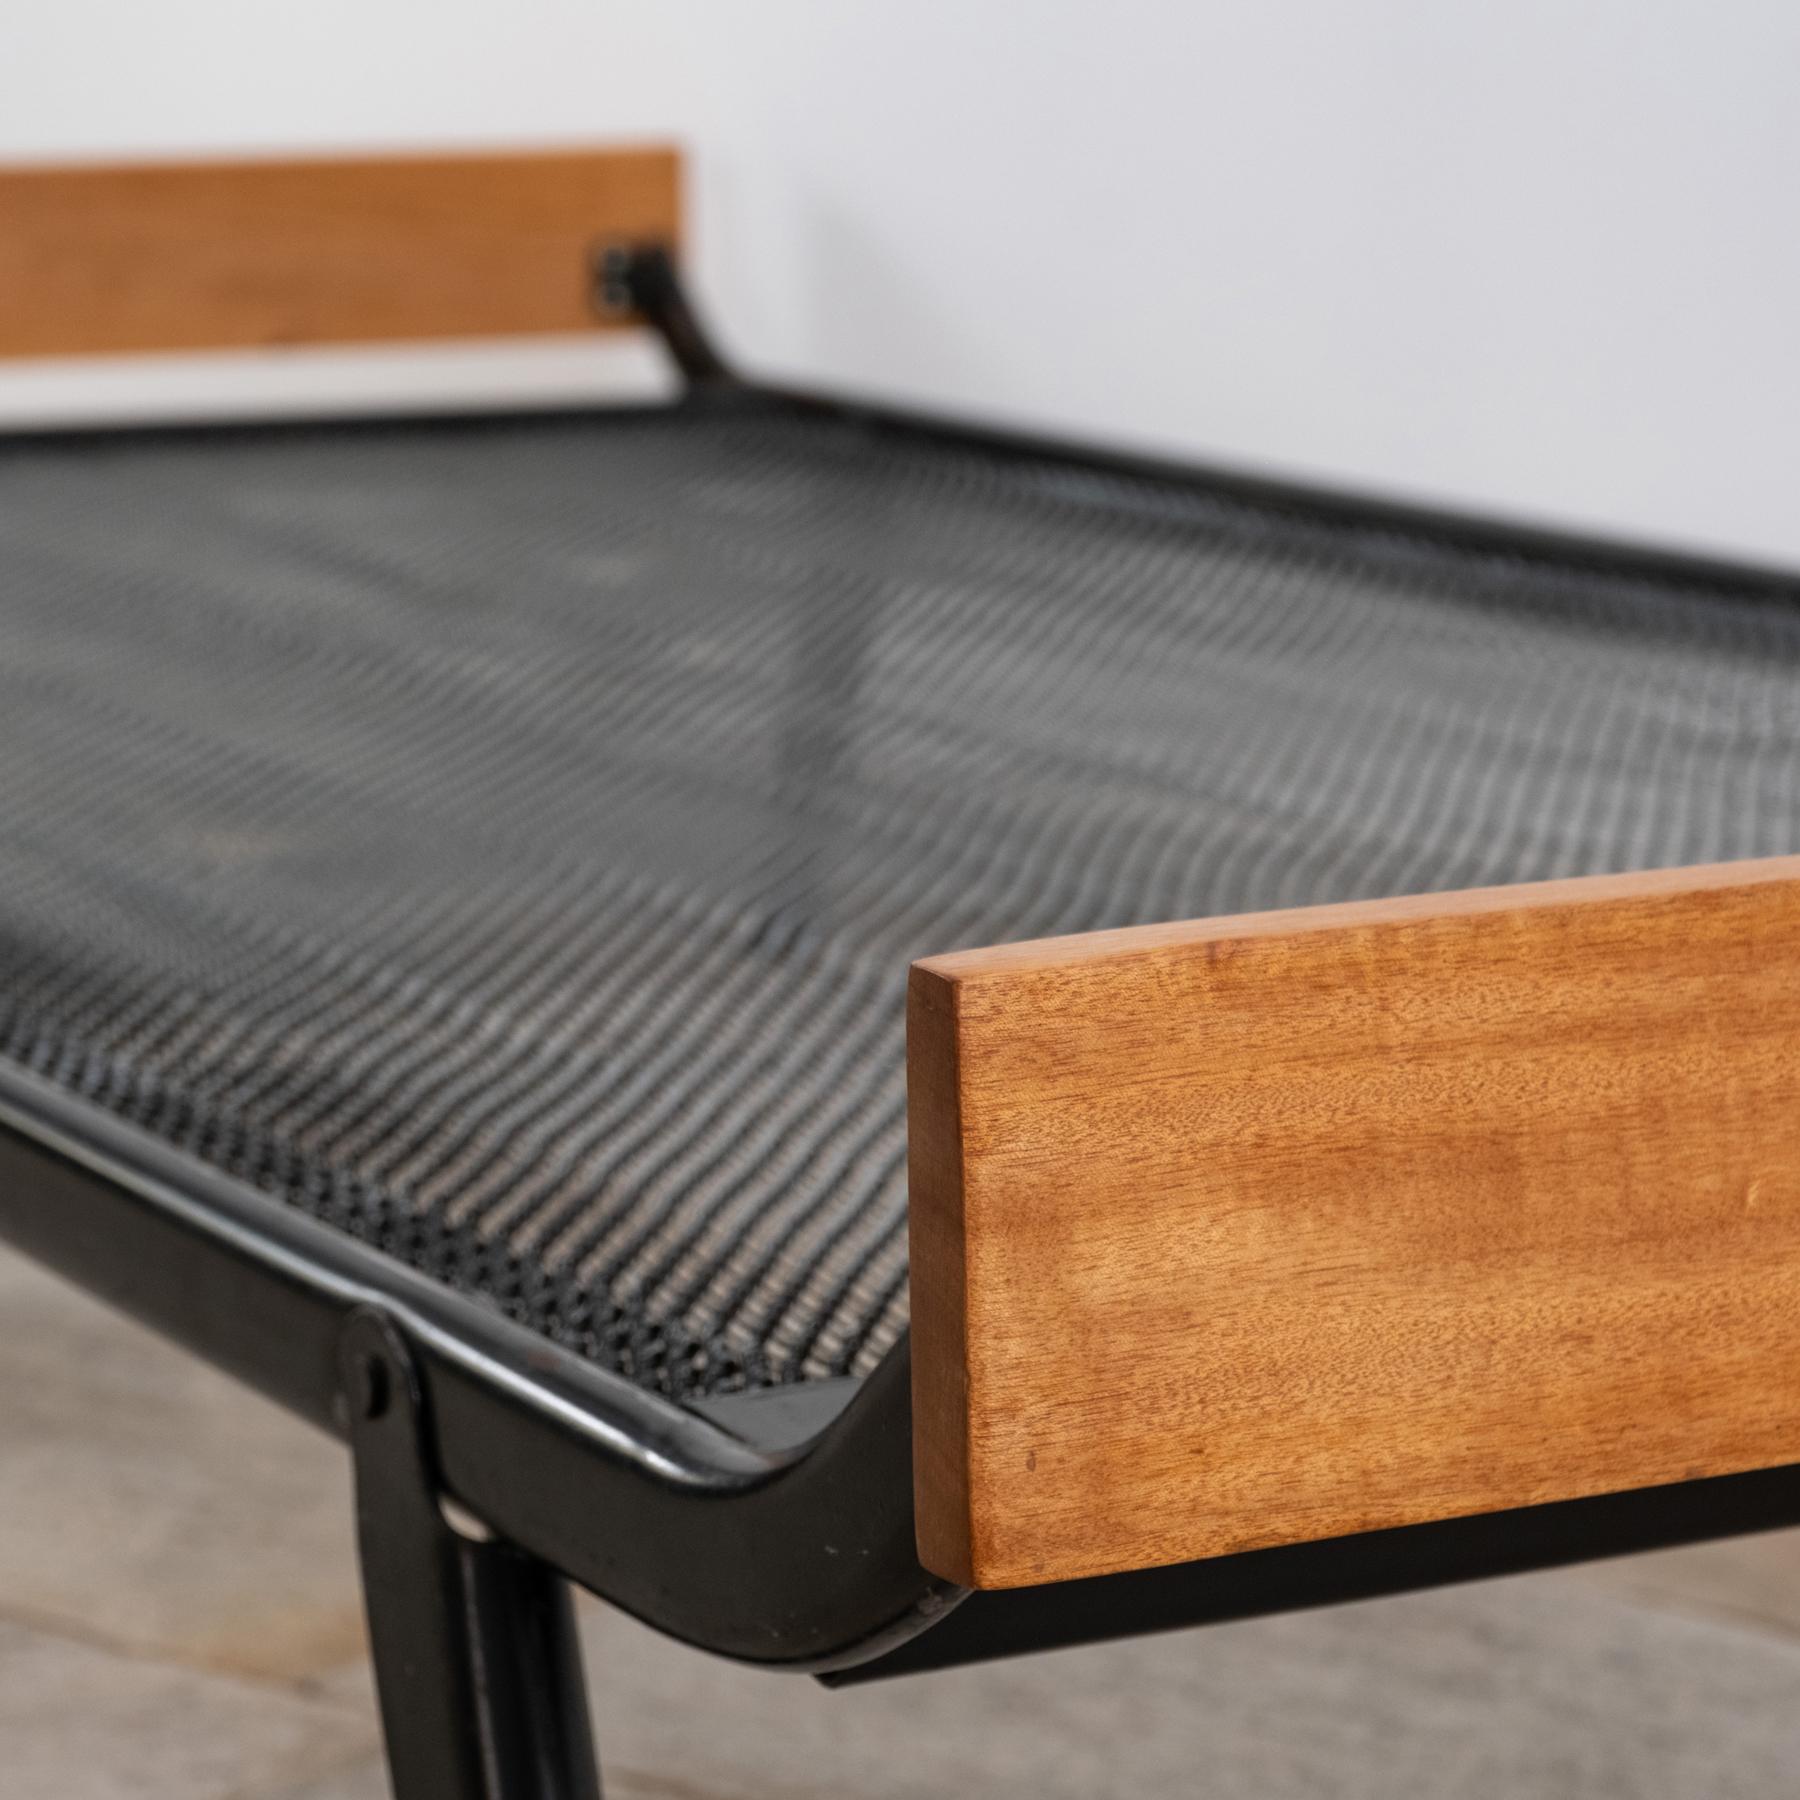 Daybed by Mertens Jomer, Netherlands 1950/60 In Good Condition For Sale In Brasília, BR